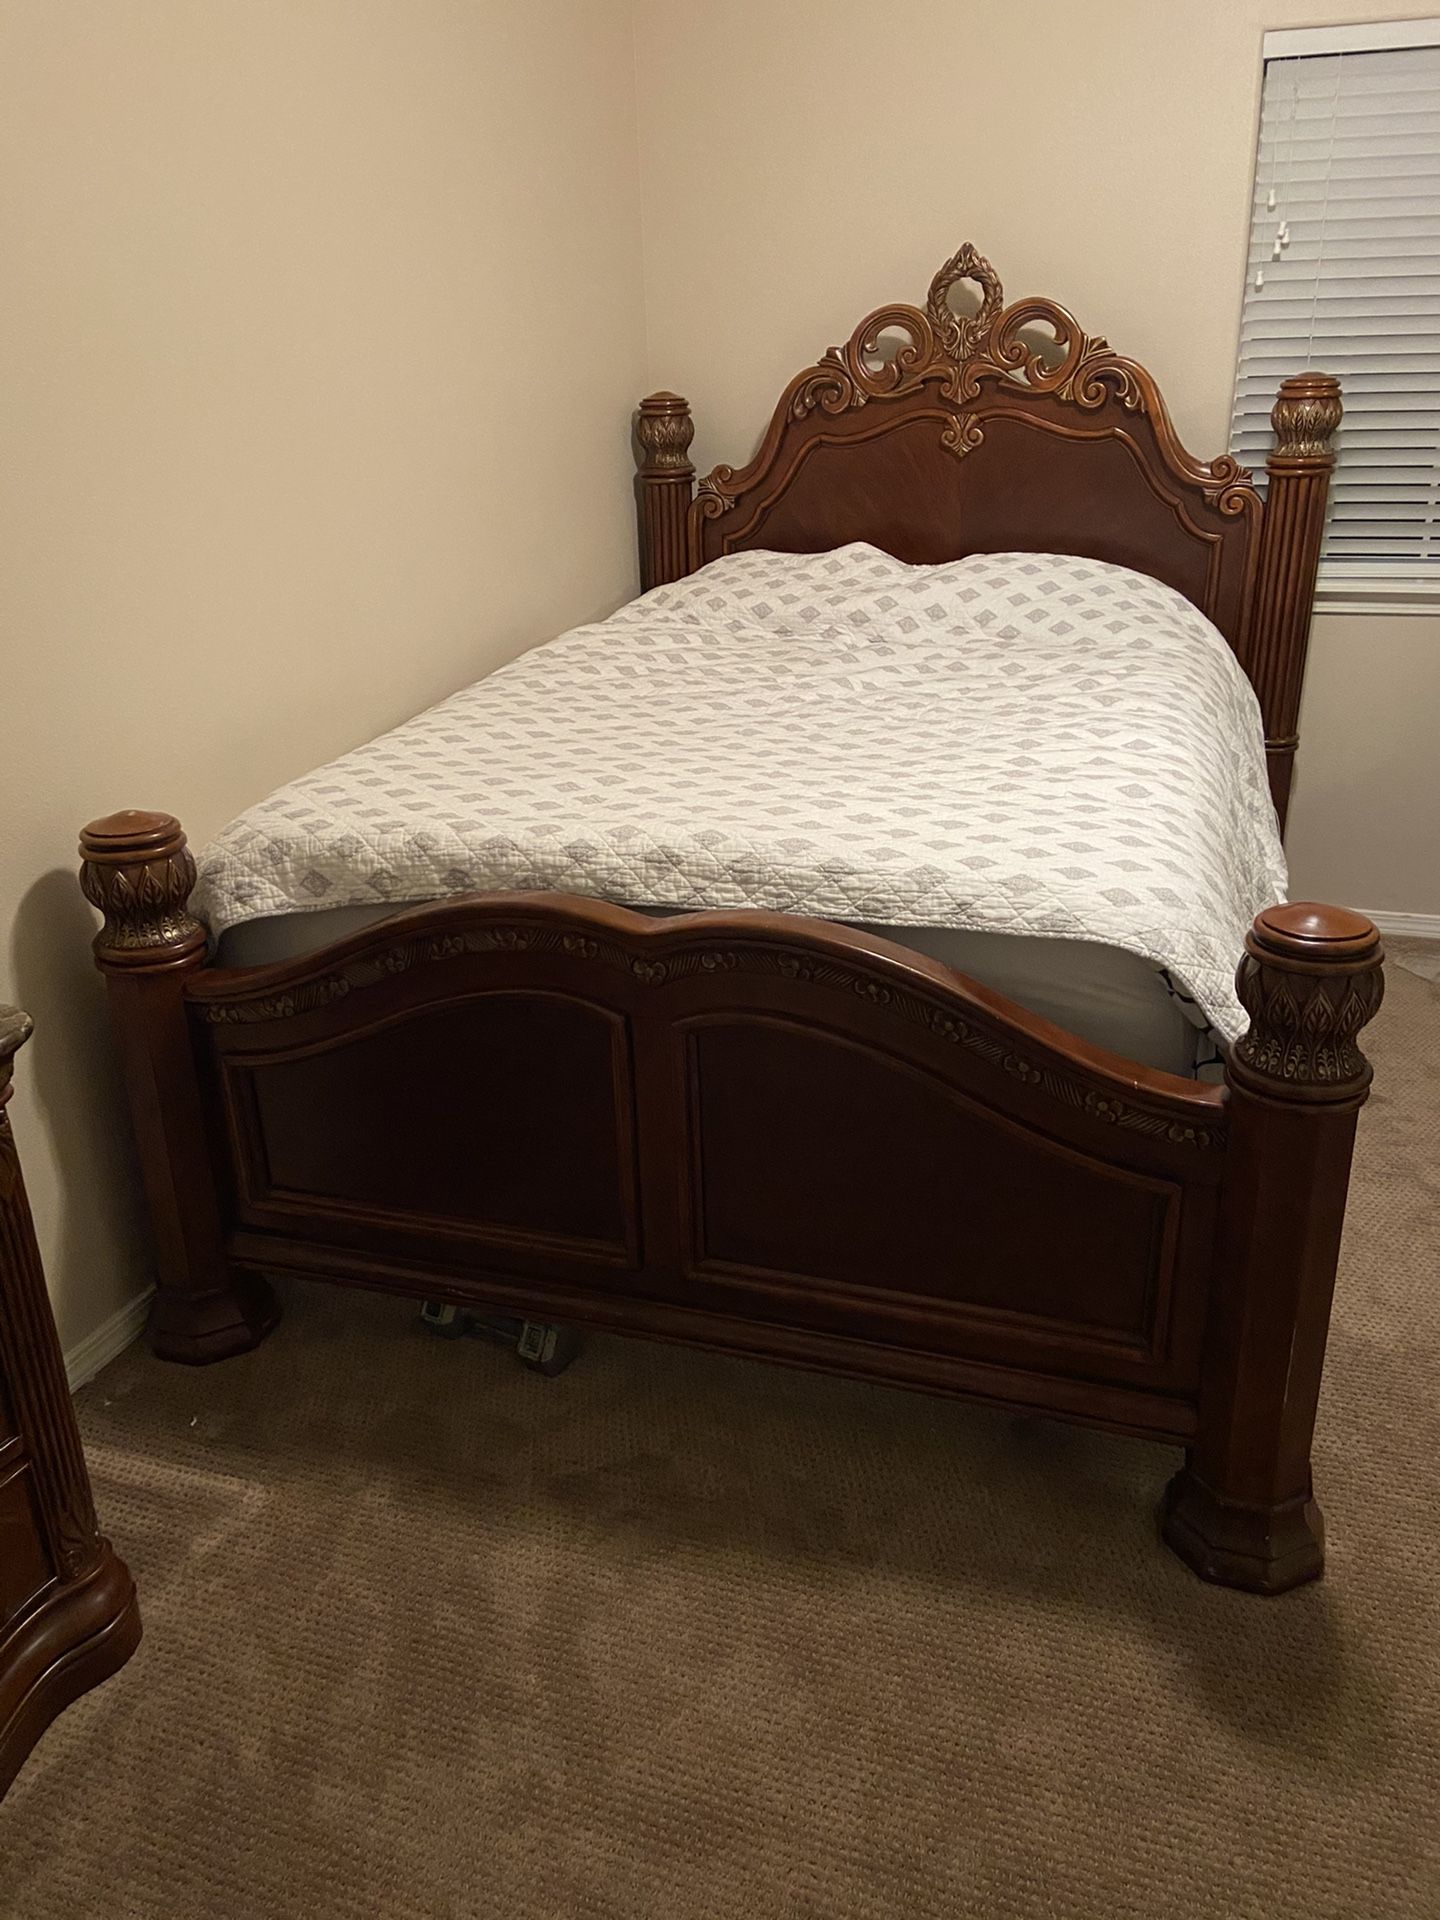 Queen sized bed set